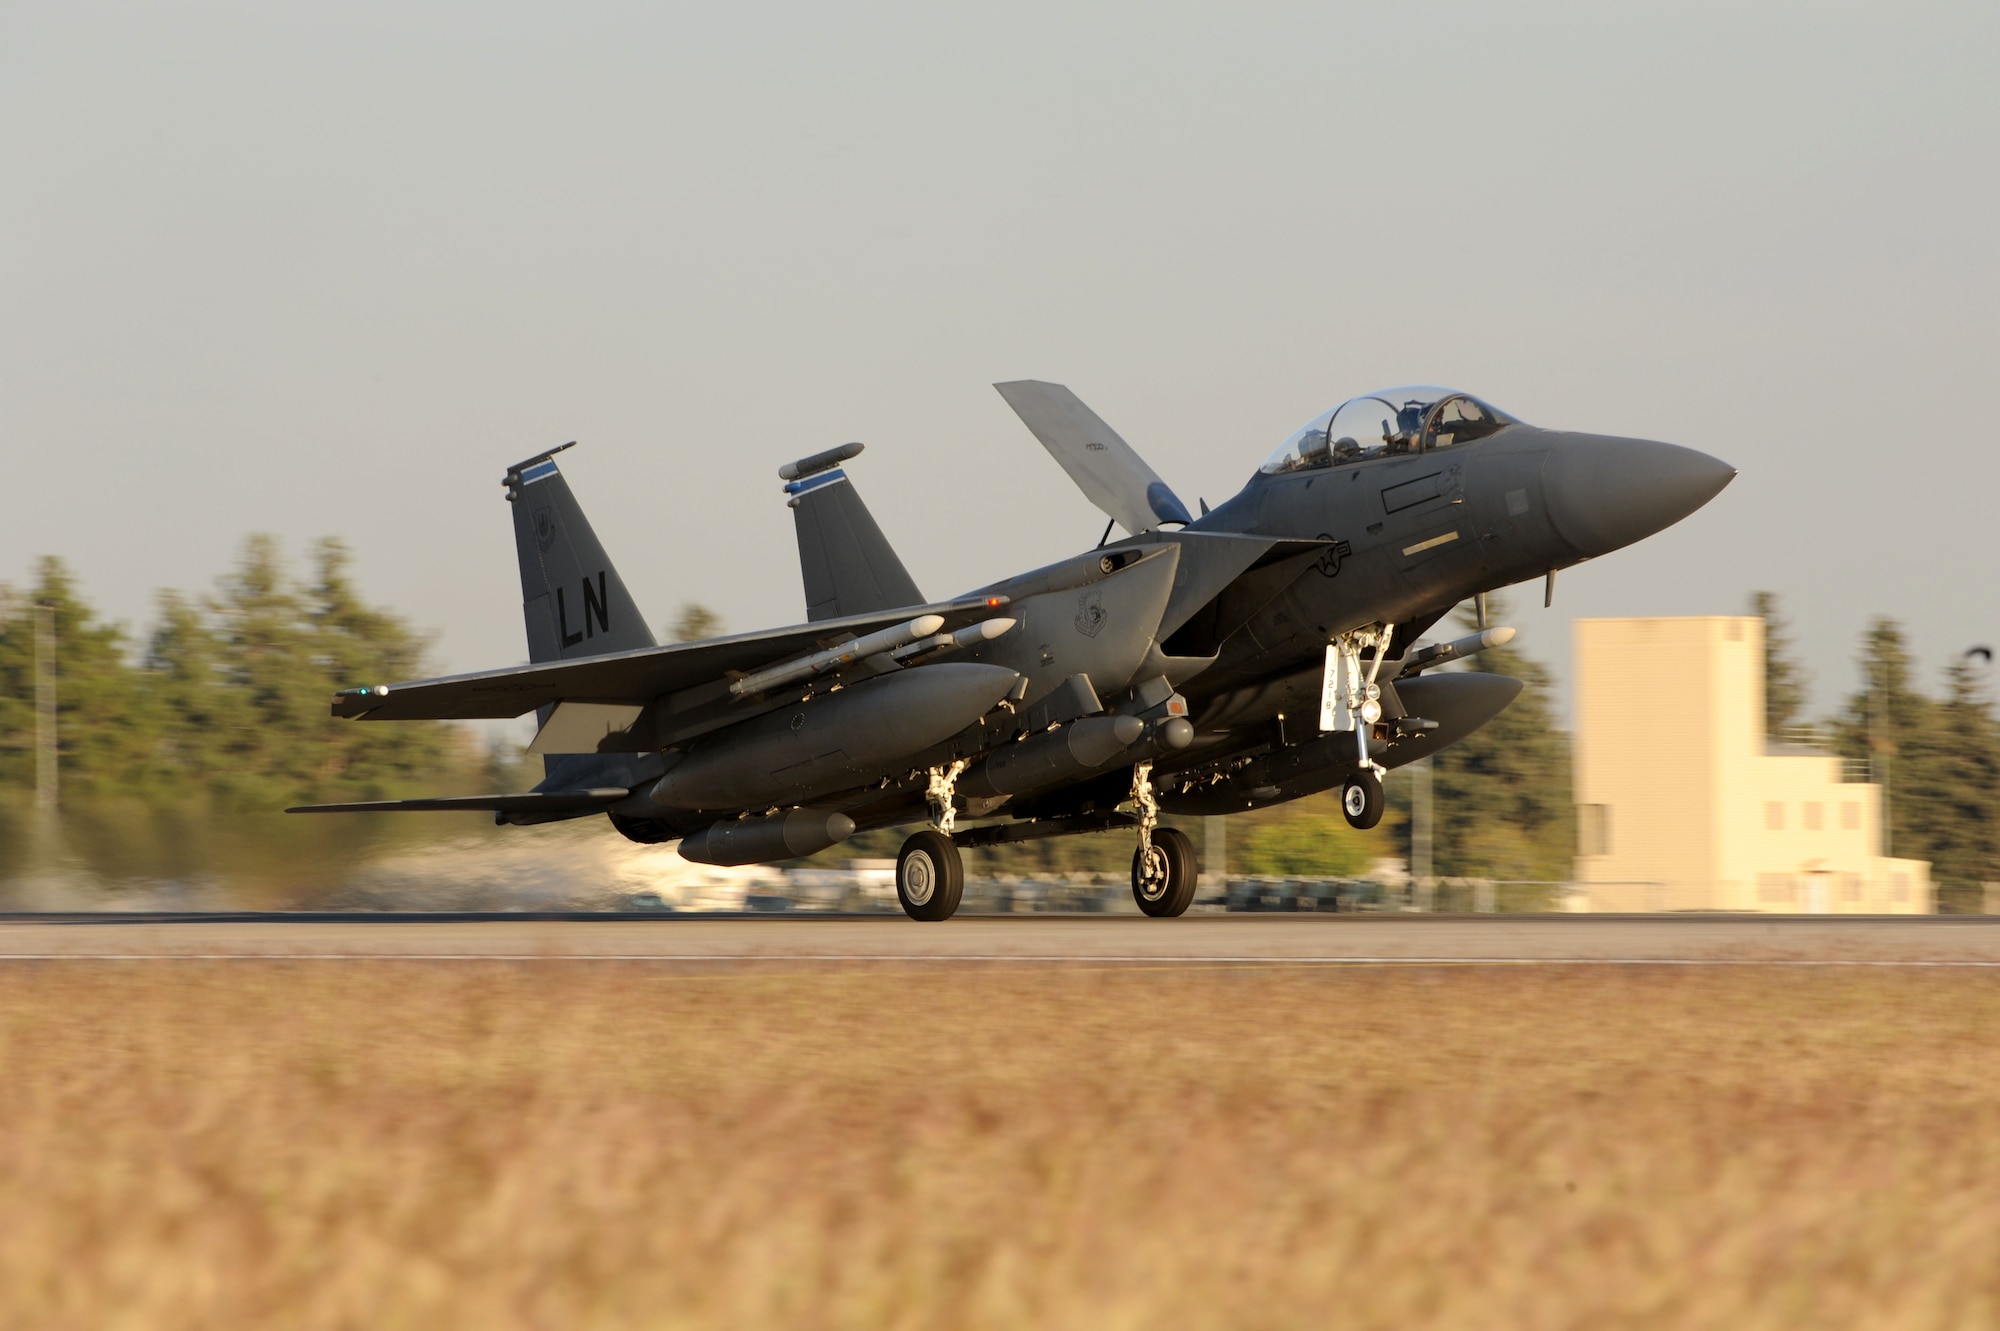 A U.S. Air Force F-15E Strike Eagle lands on the runway Nov. 12, 2015, at Incirlik Air Base, Turkey. Six F-15Es from the 48th Fighter Wing based at RAF Lakenheath, UK, are deployed to Incirlik AB as a part of Operation Inherent Resolve.These aircraft are designed to perform air-to-air and air-to-ground missions in all weather conditions. (U.S. Air Force photo by Tech. Sgt. Taylor Worley) 